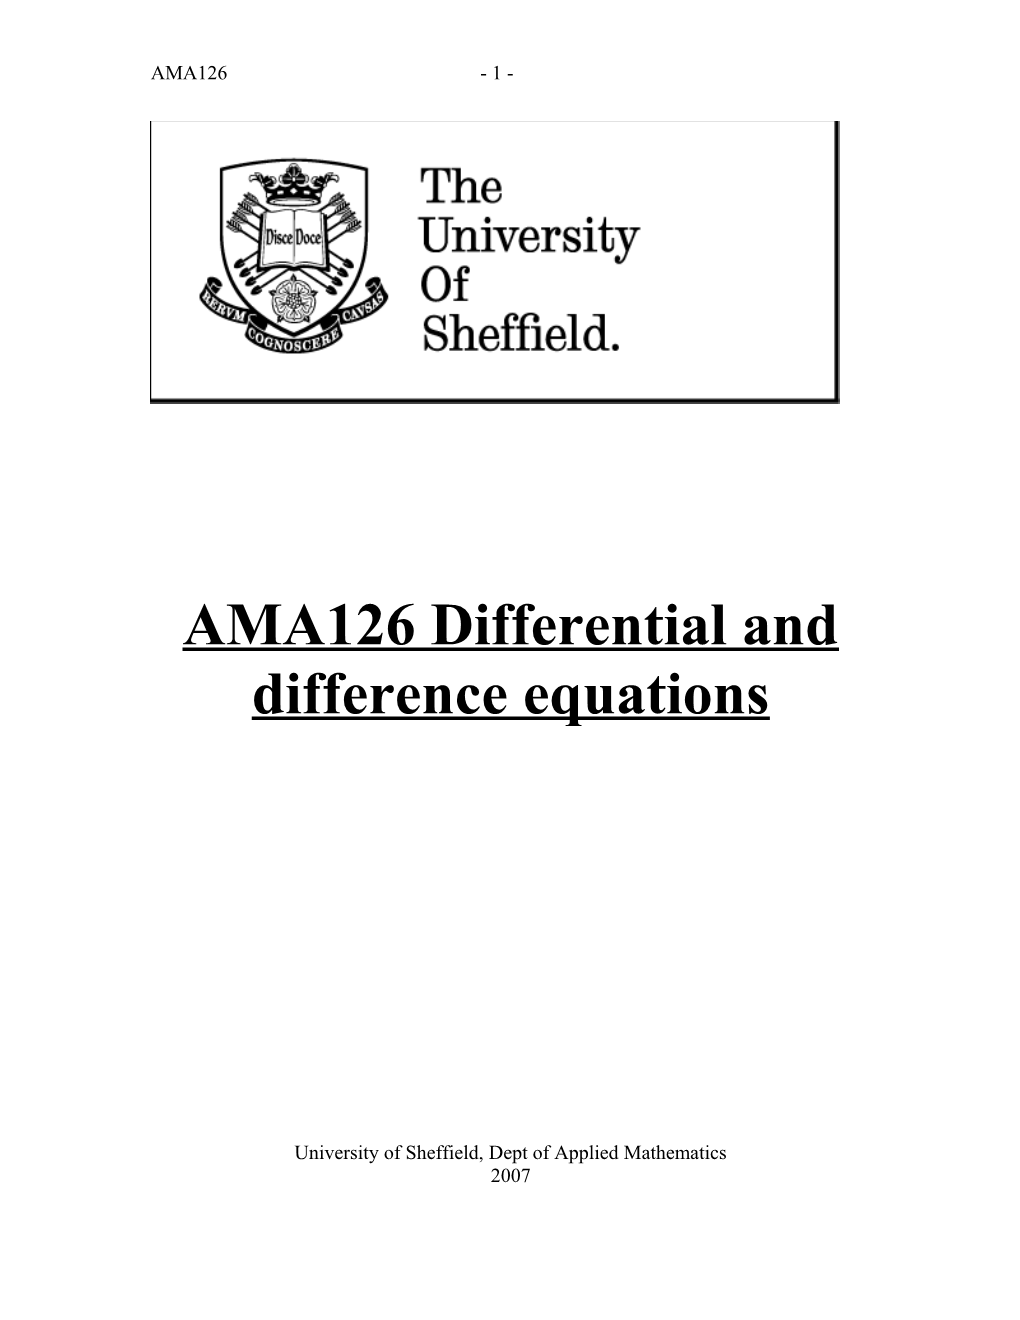 AMA126 Differential and Difference Equations